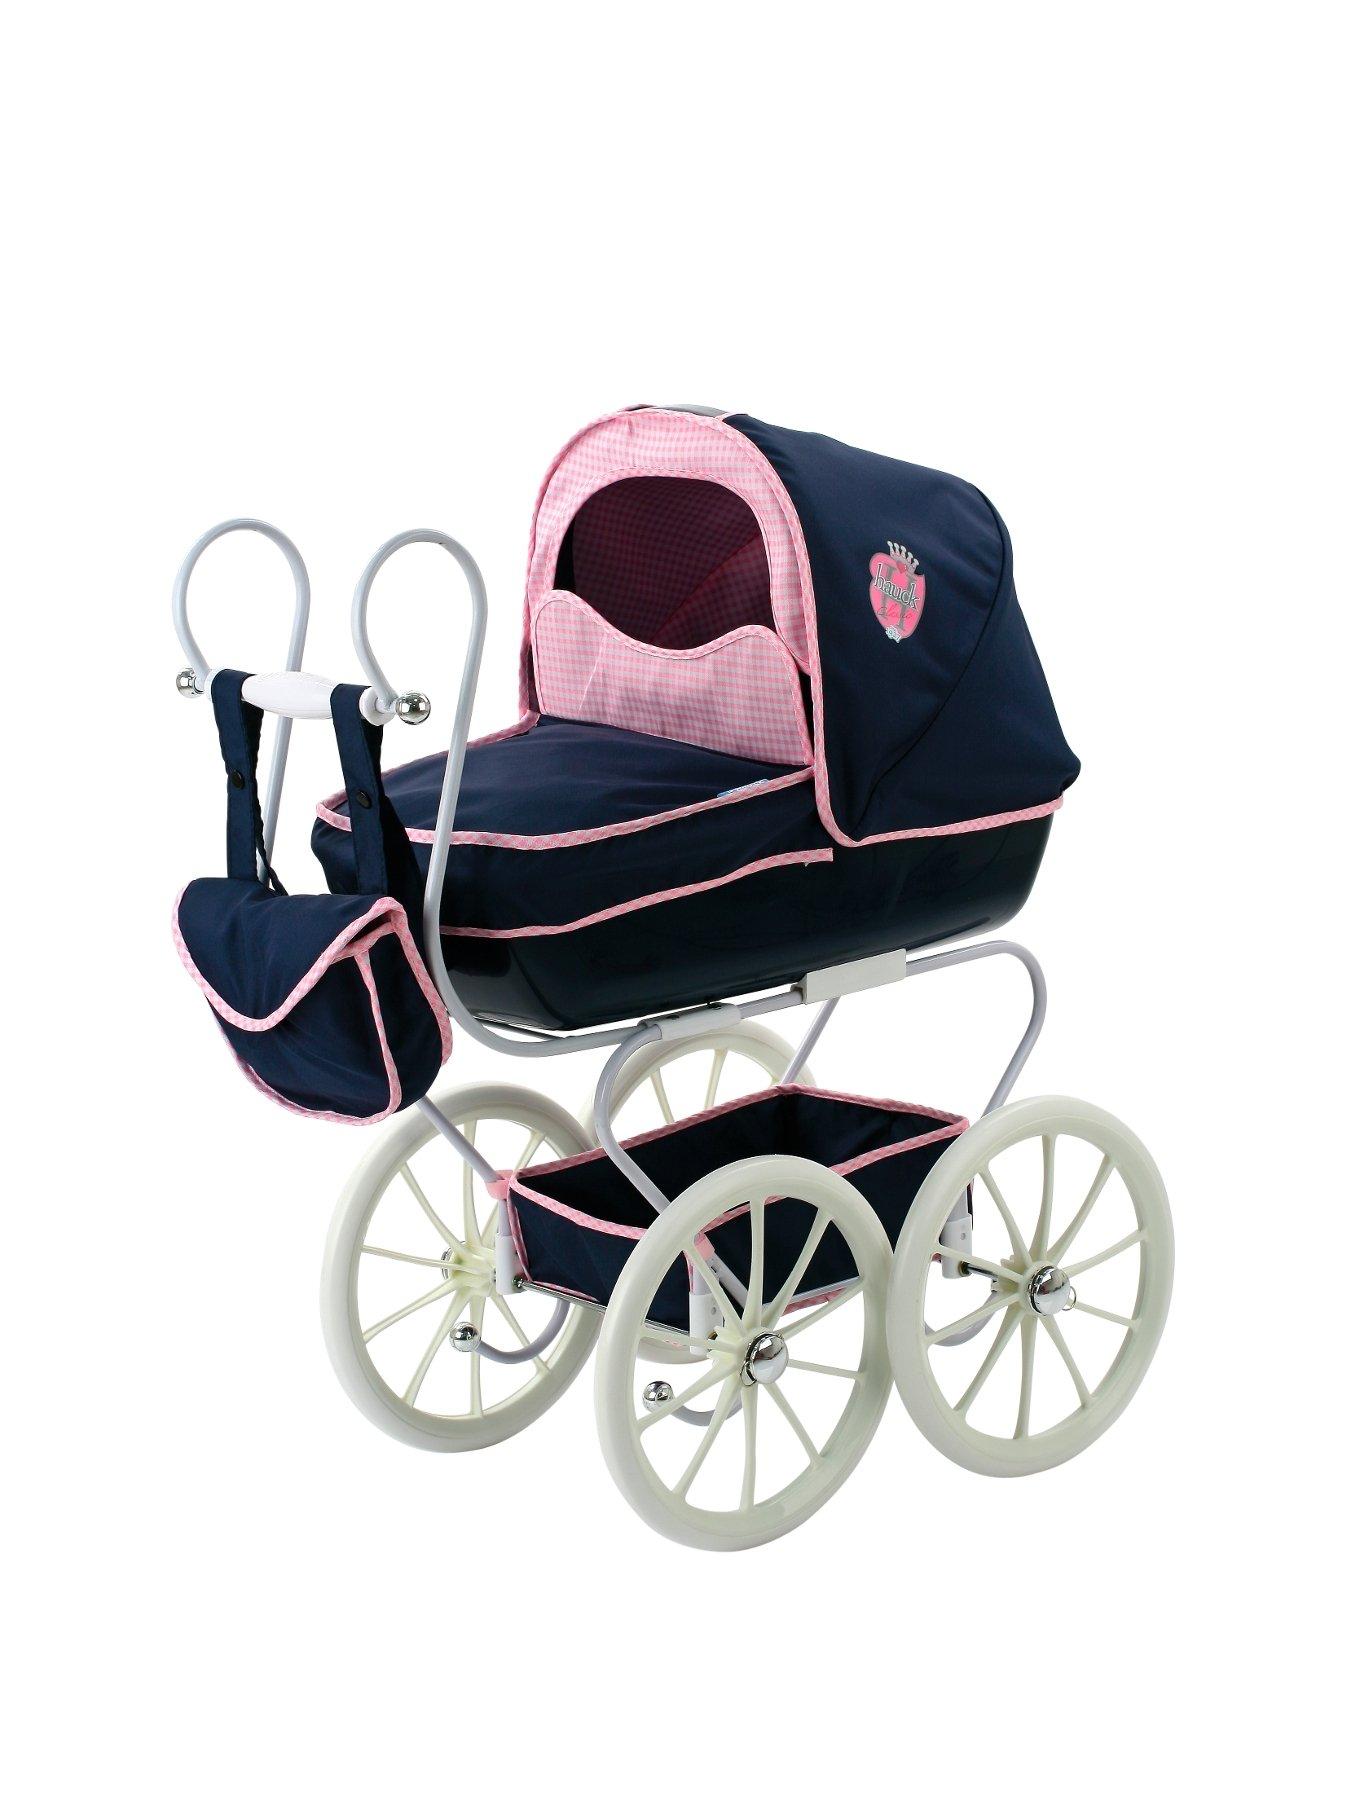 dolls prams for 10 year olds